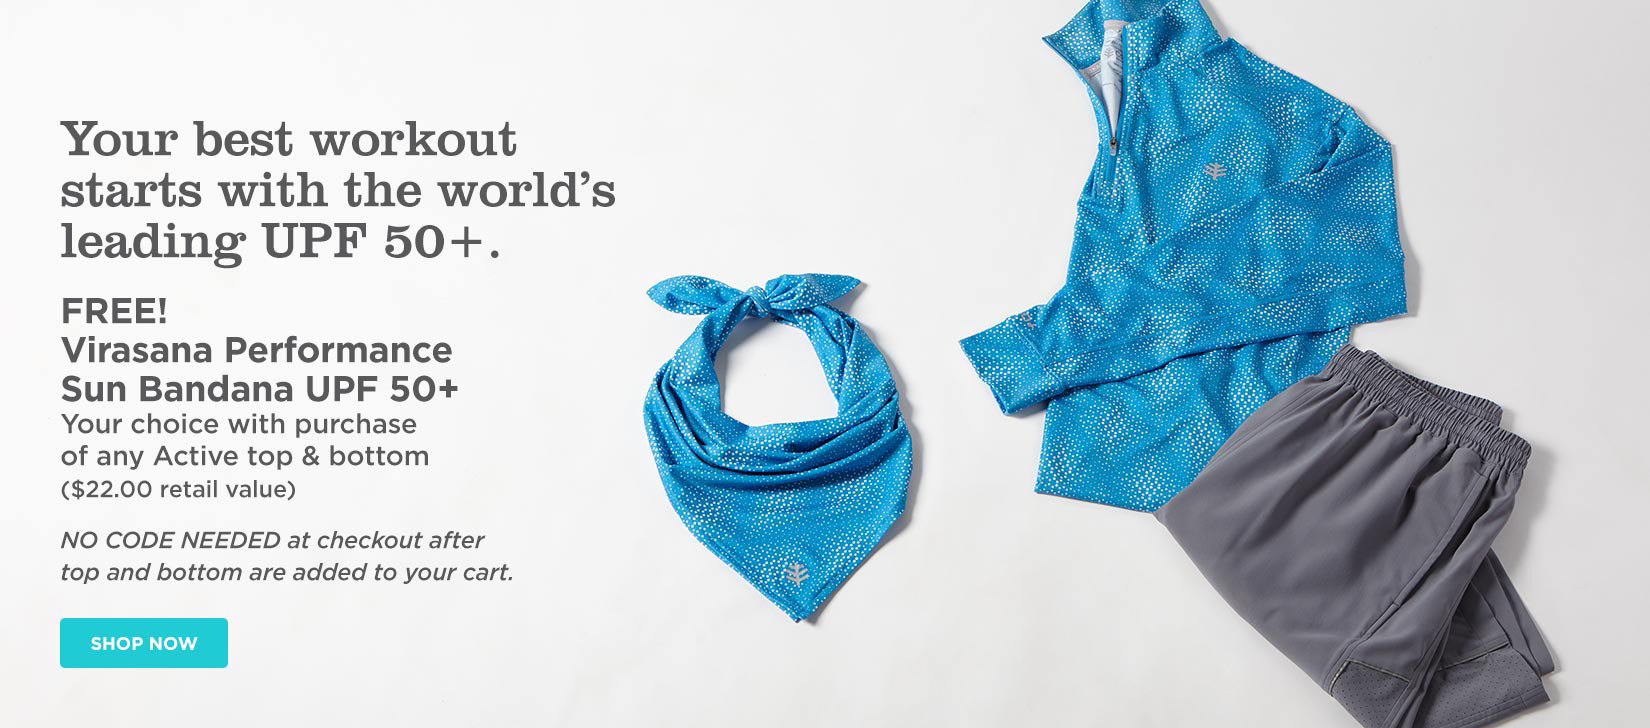 Your best workout starts with the world's leading UPF 50+. FREE Virasana Performance Sun Bandana. Your choice with purchase of any Active top and bottom. ($22 retail value) NO CODE NEEDED at checkout after top and bottom are added to your cart